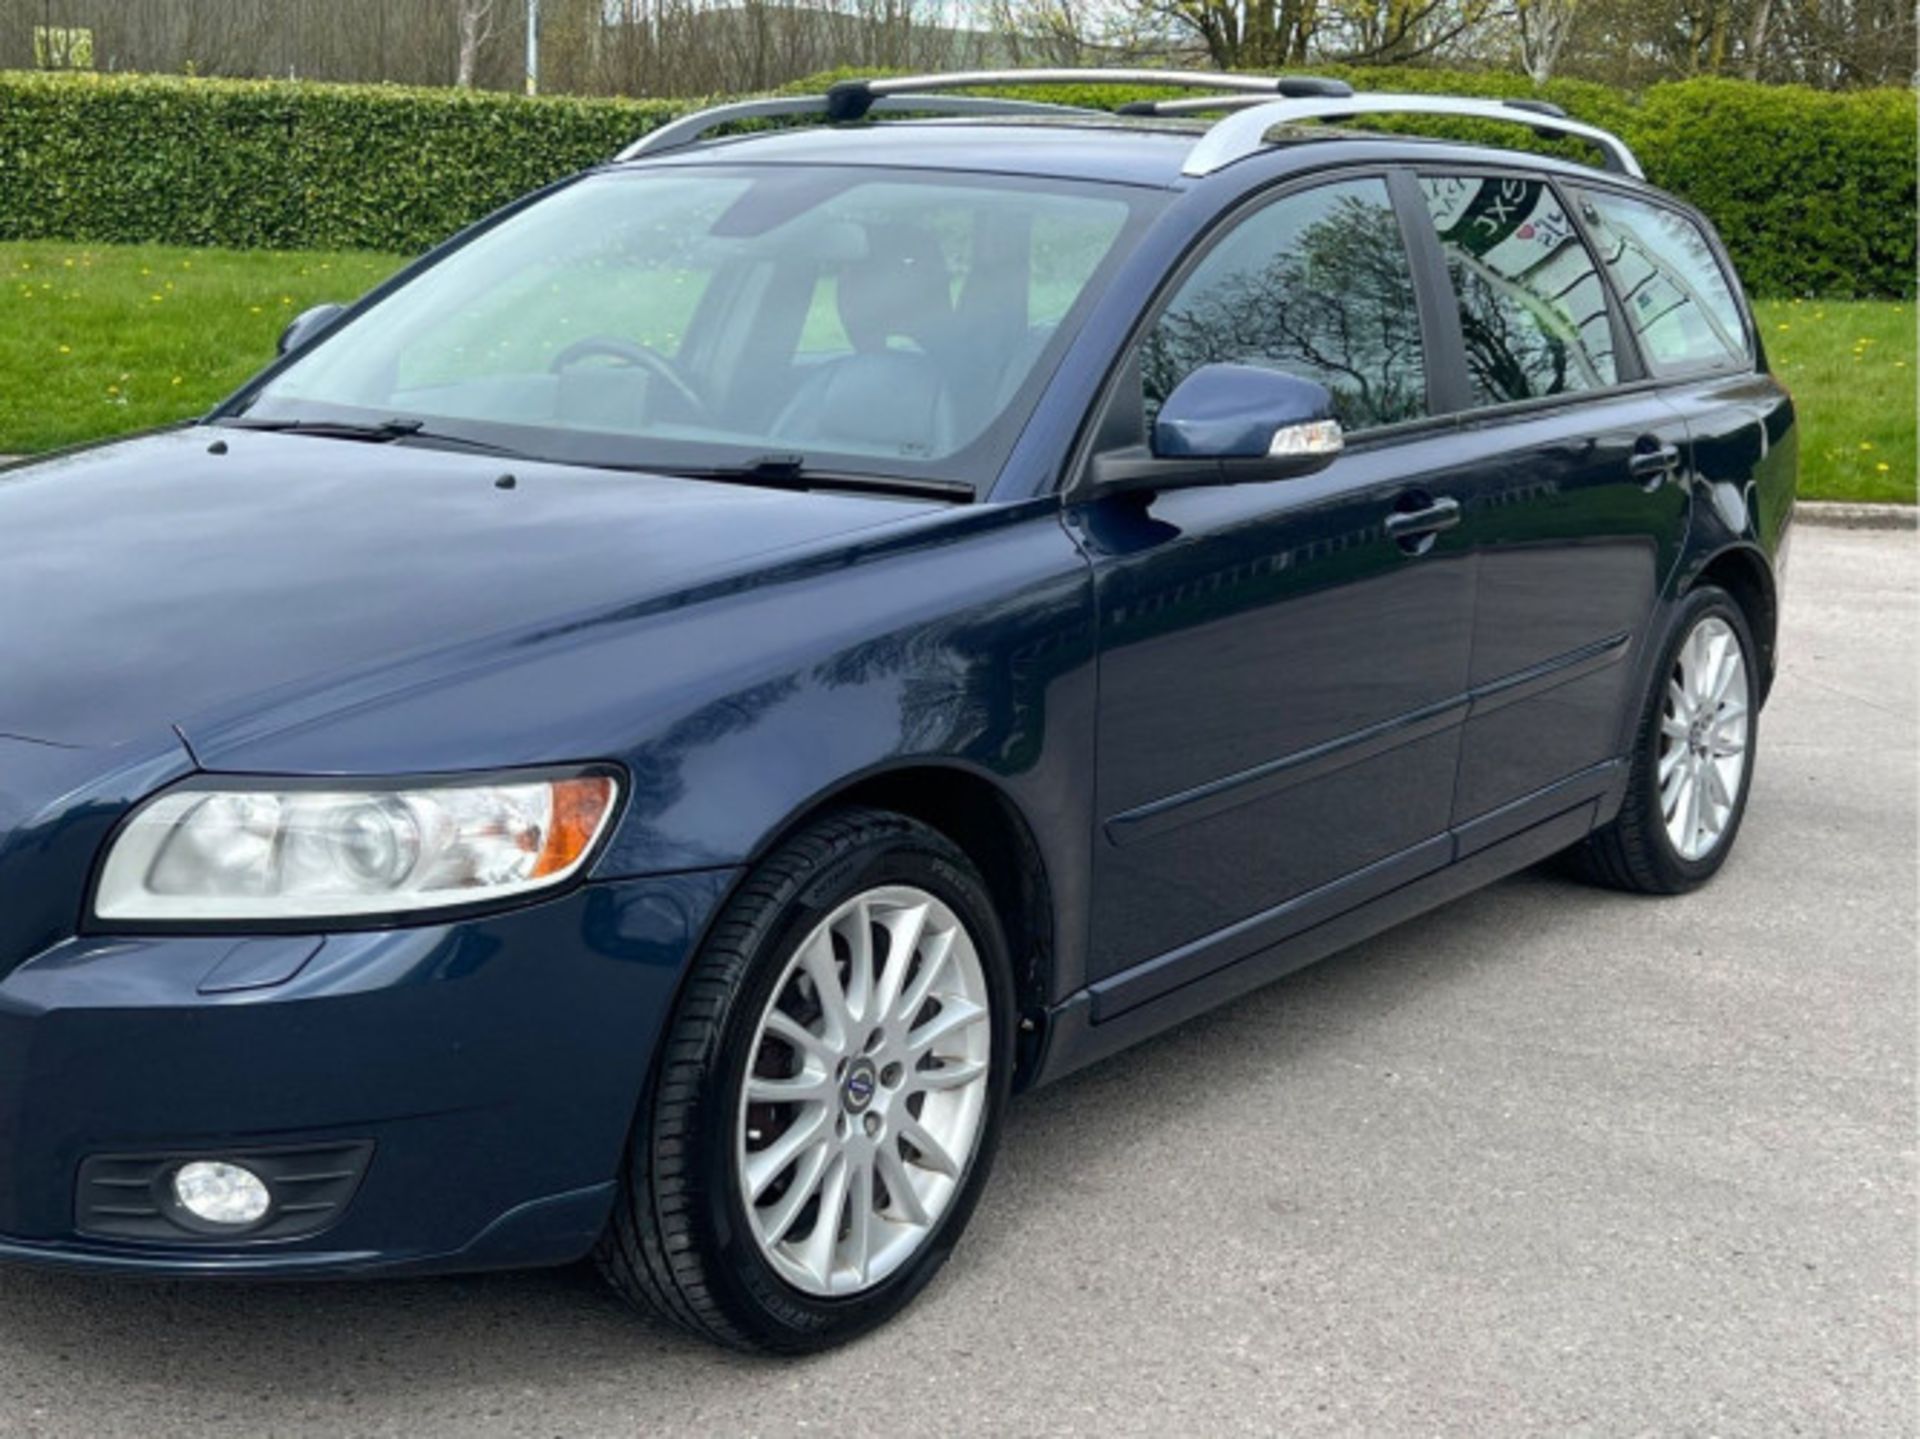 VOLVO V50 1.6D DRIVE SE LUX EDITION EURO 5 (S/S) 5DR (2012) - Image 17 of 88